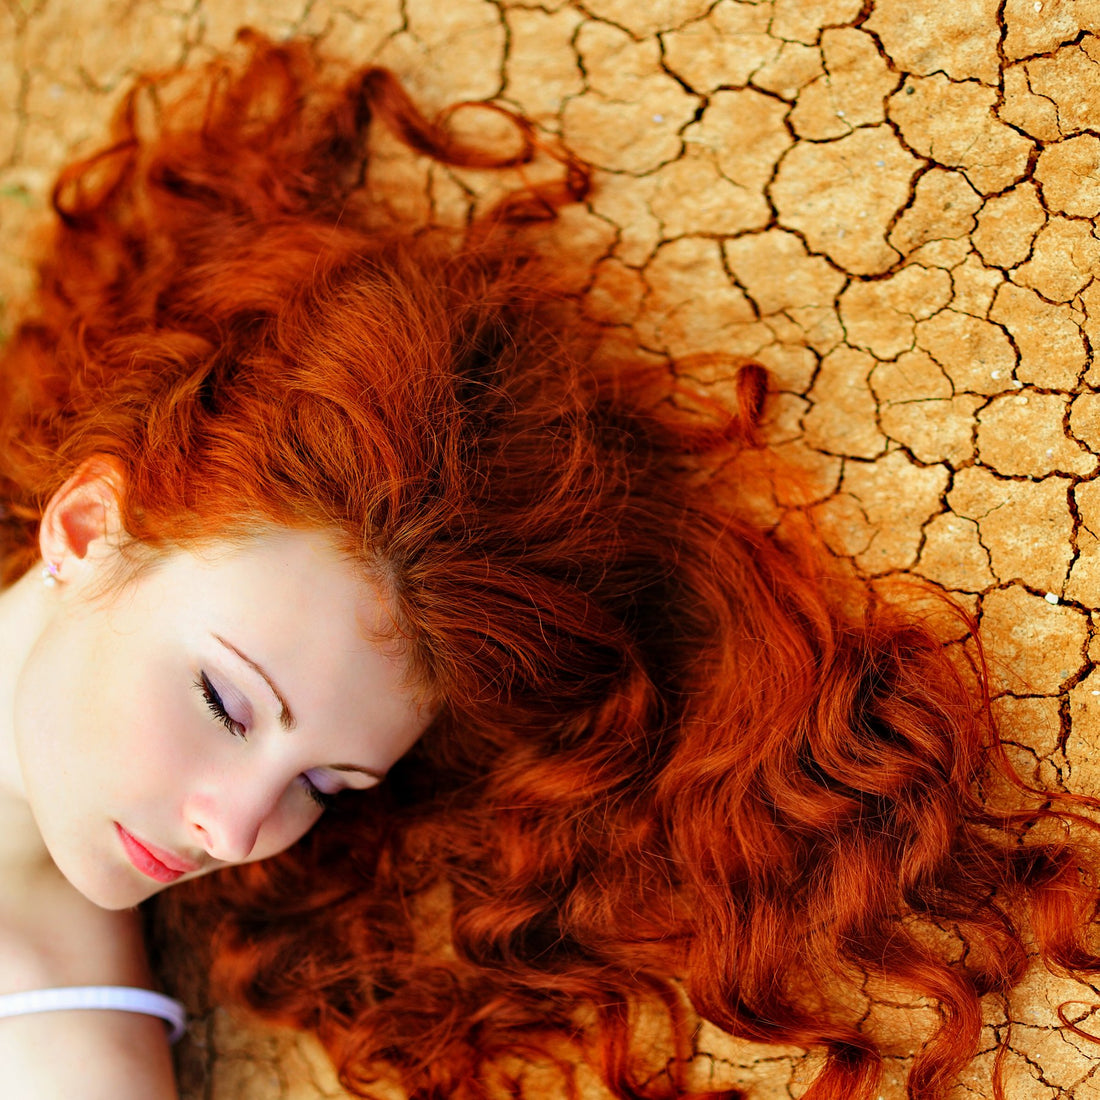 What is Henna Hair Dye and How Does it Work?